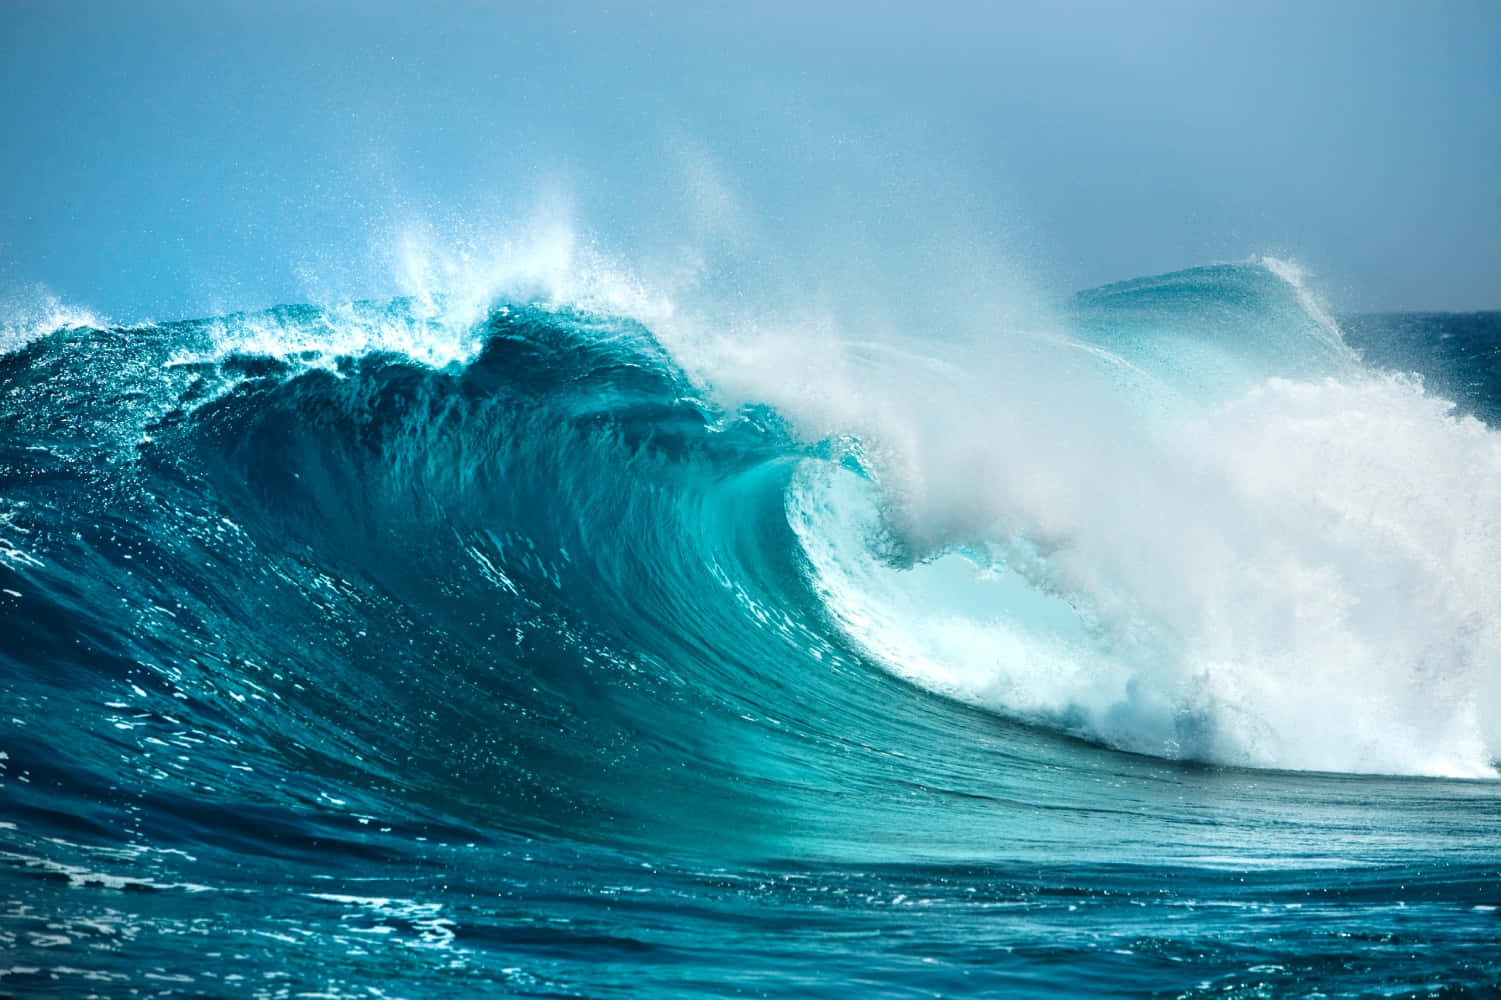 Feel the rush of a powerful wave